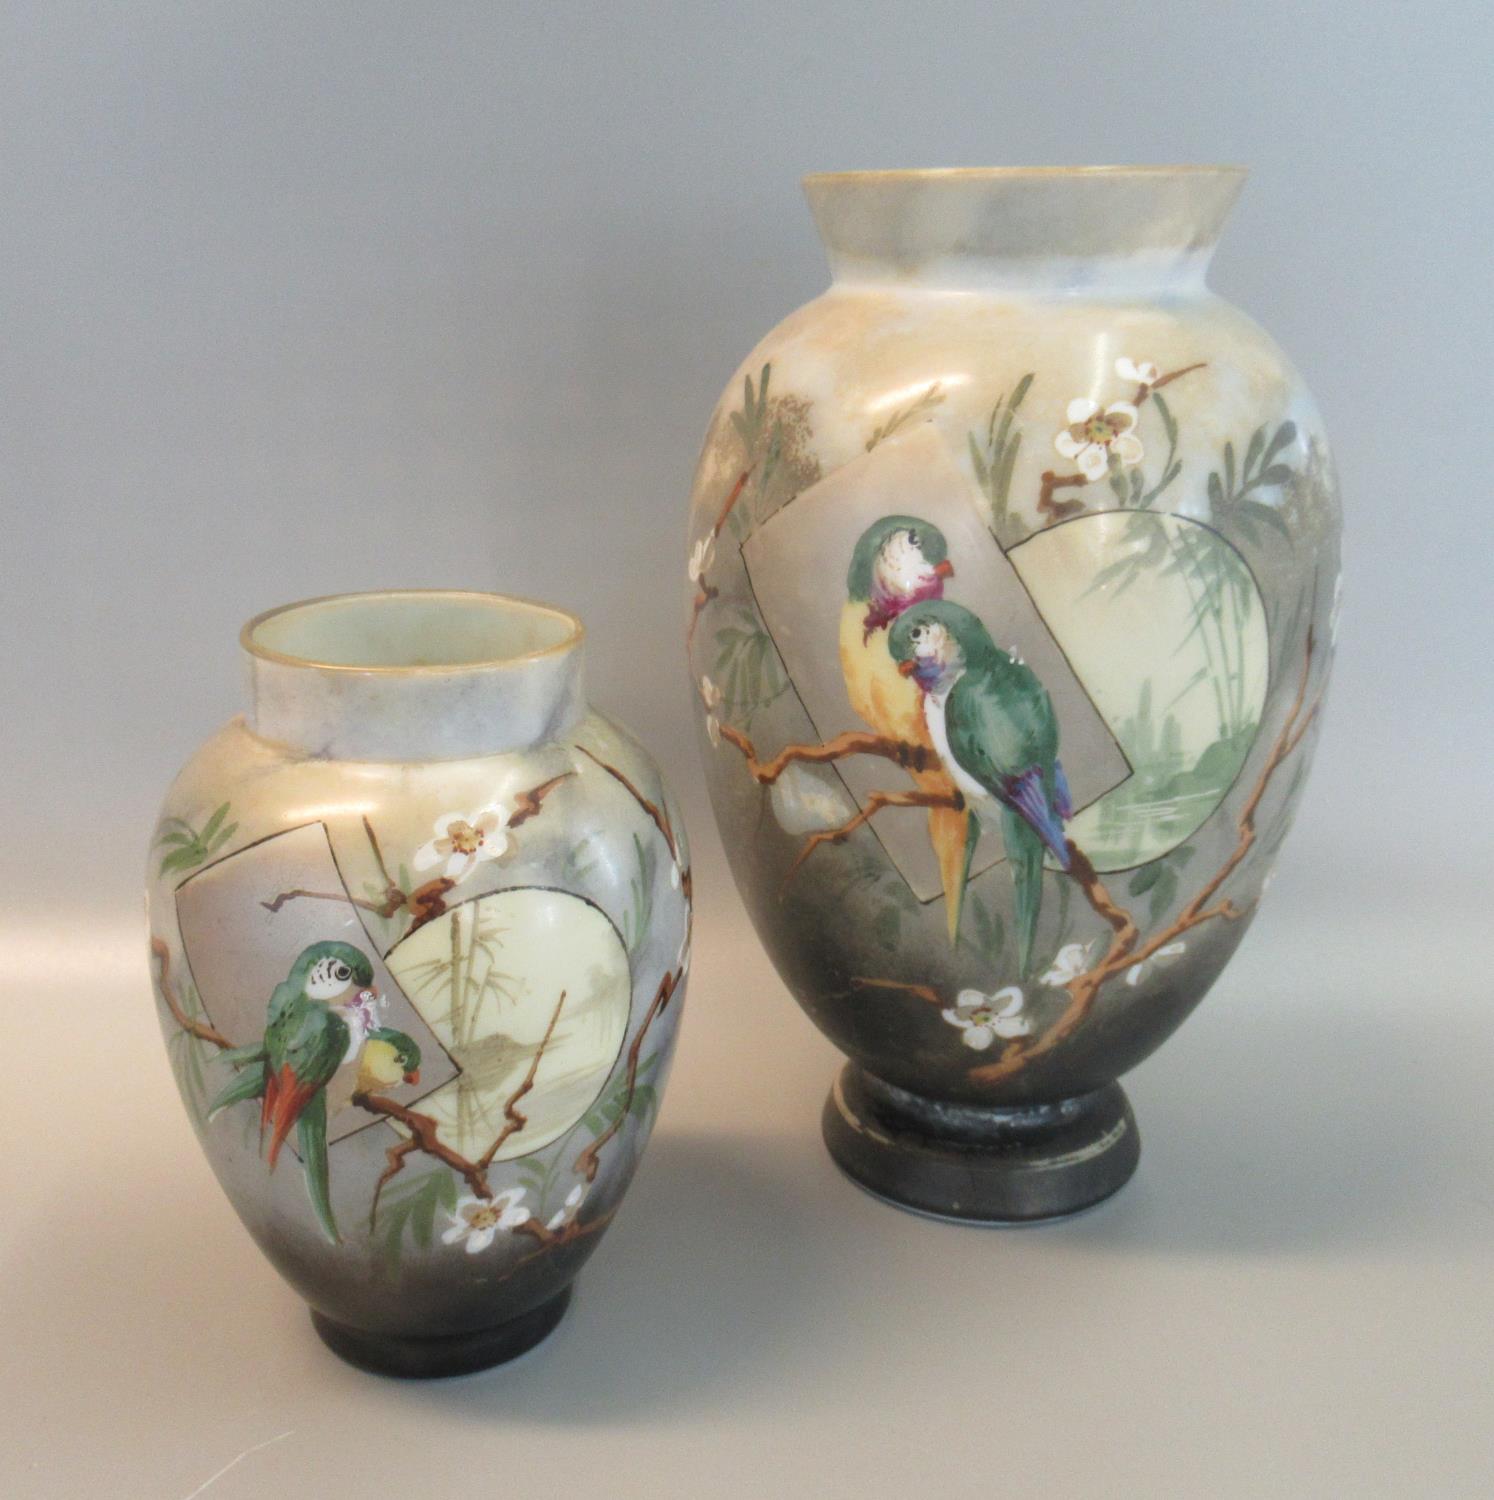 Victorian opaline glass baluster vase decorated with parrots amongst foliage, together with a